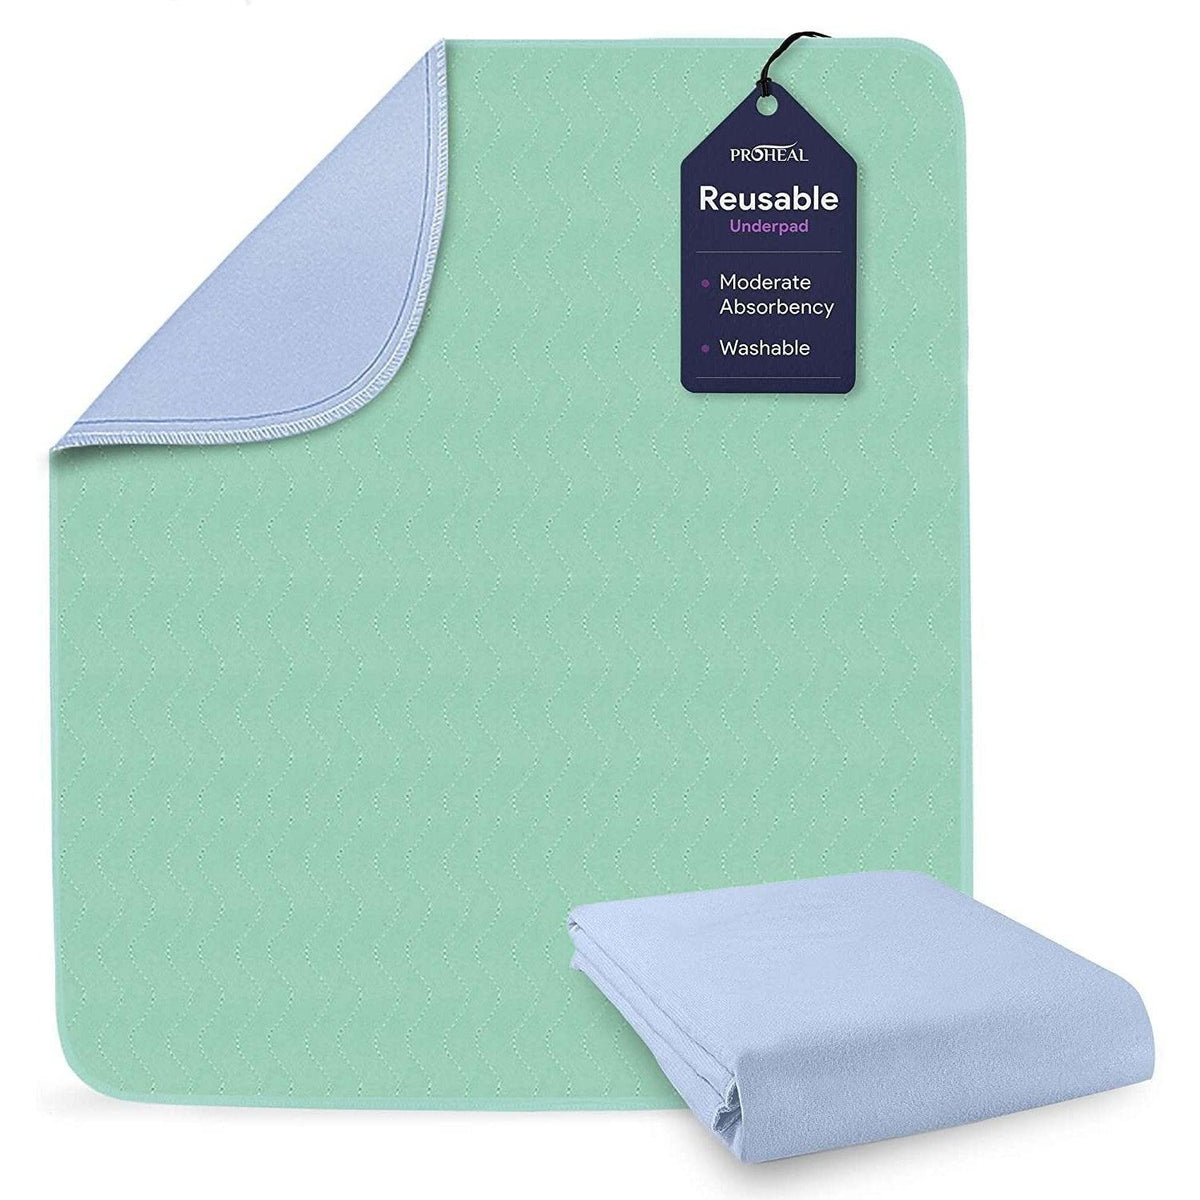 https://prohealproducts.com/cdn/shop/files/washable-bed-pads-quick-dry-poly-laminated-reusable-chucks-34x36-proheal-products-1_1200x1200.jpg?v=1689335503